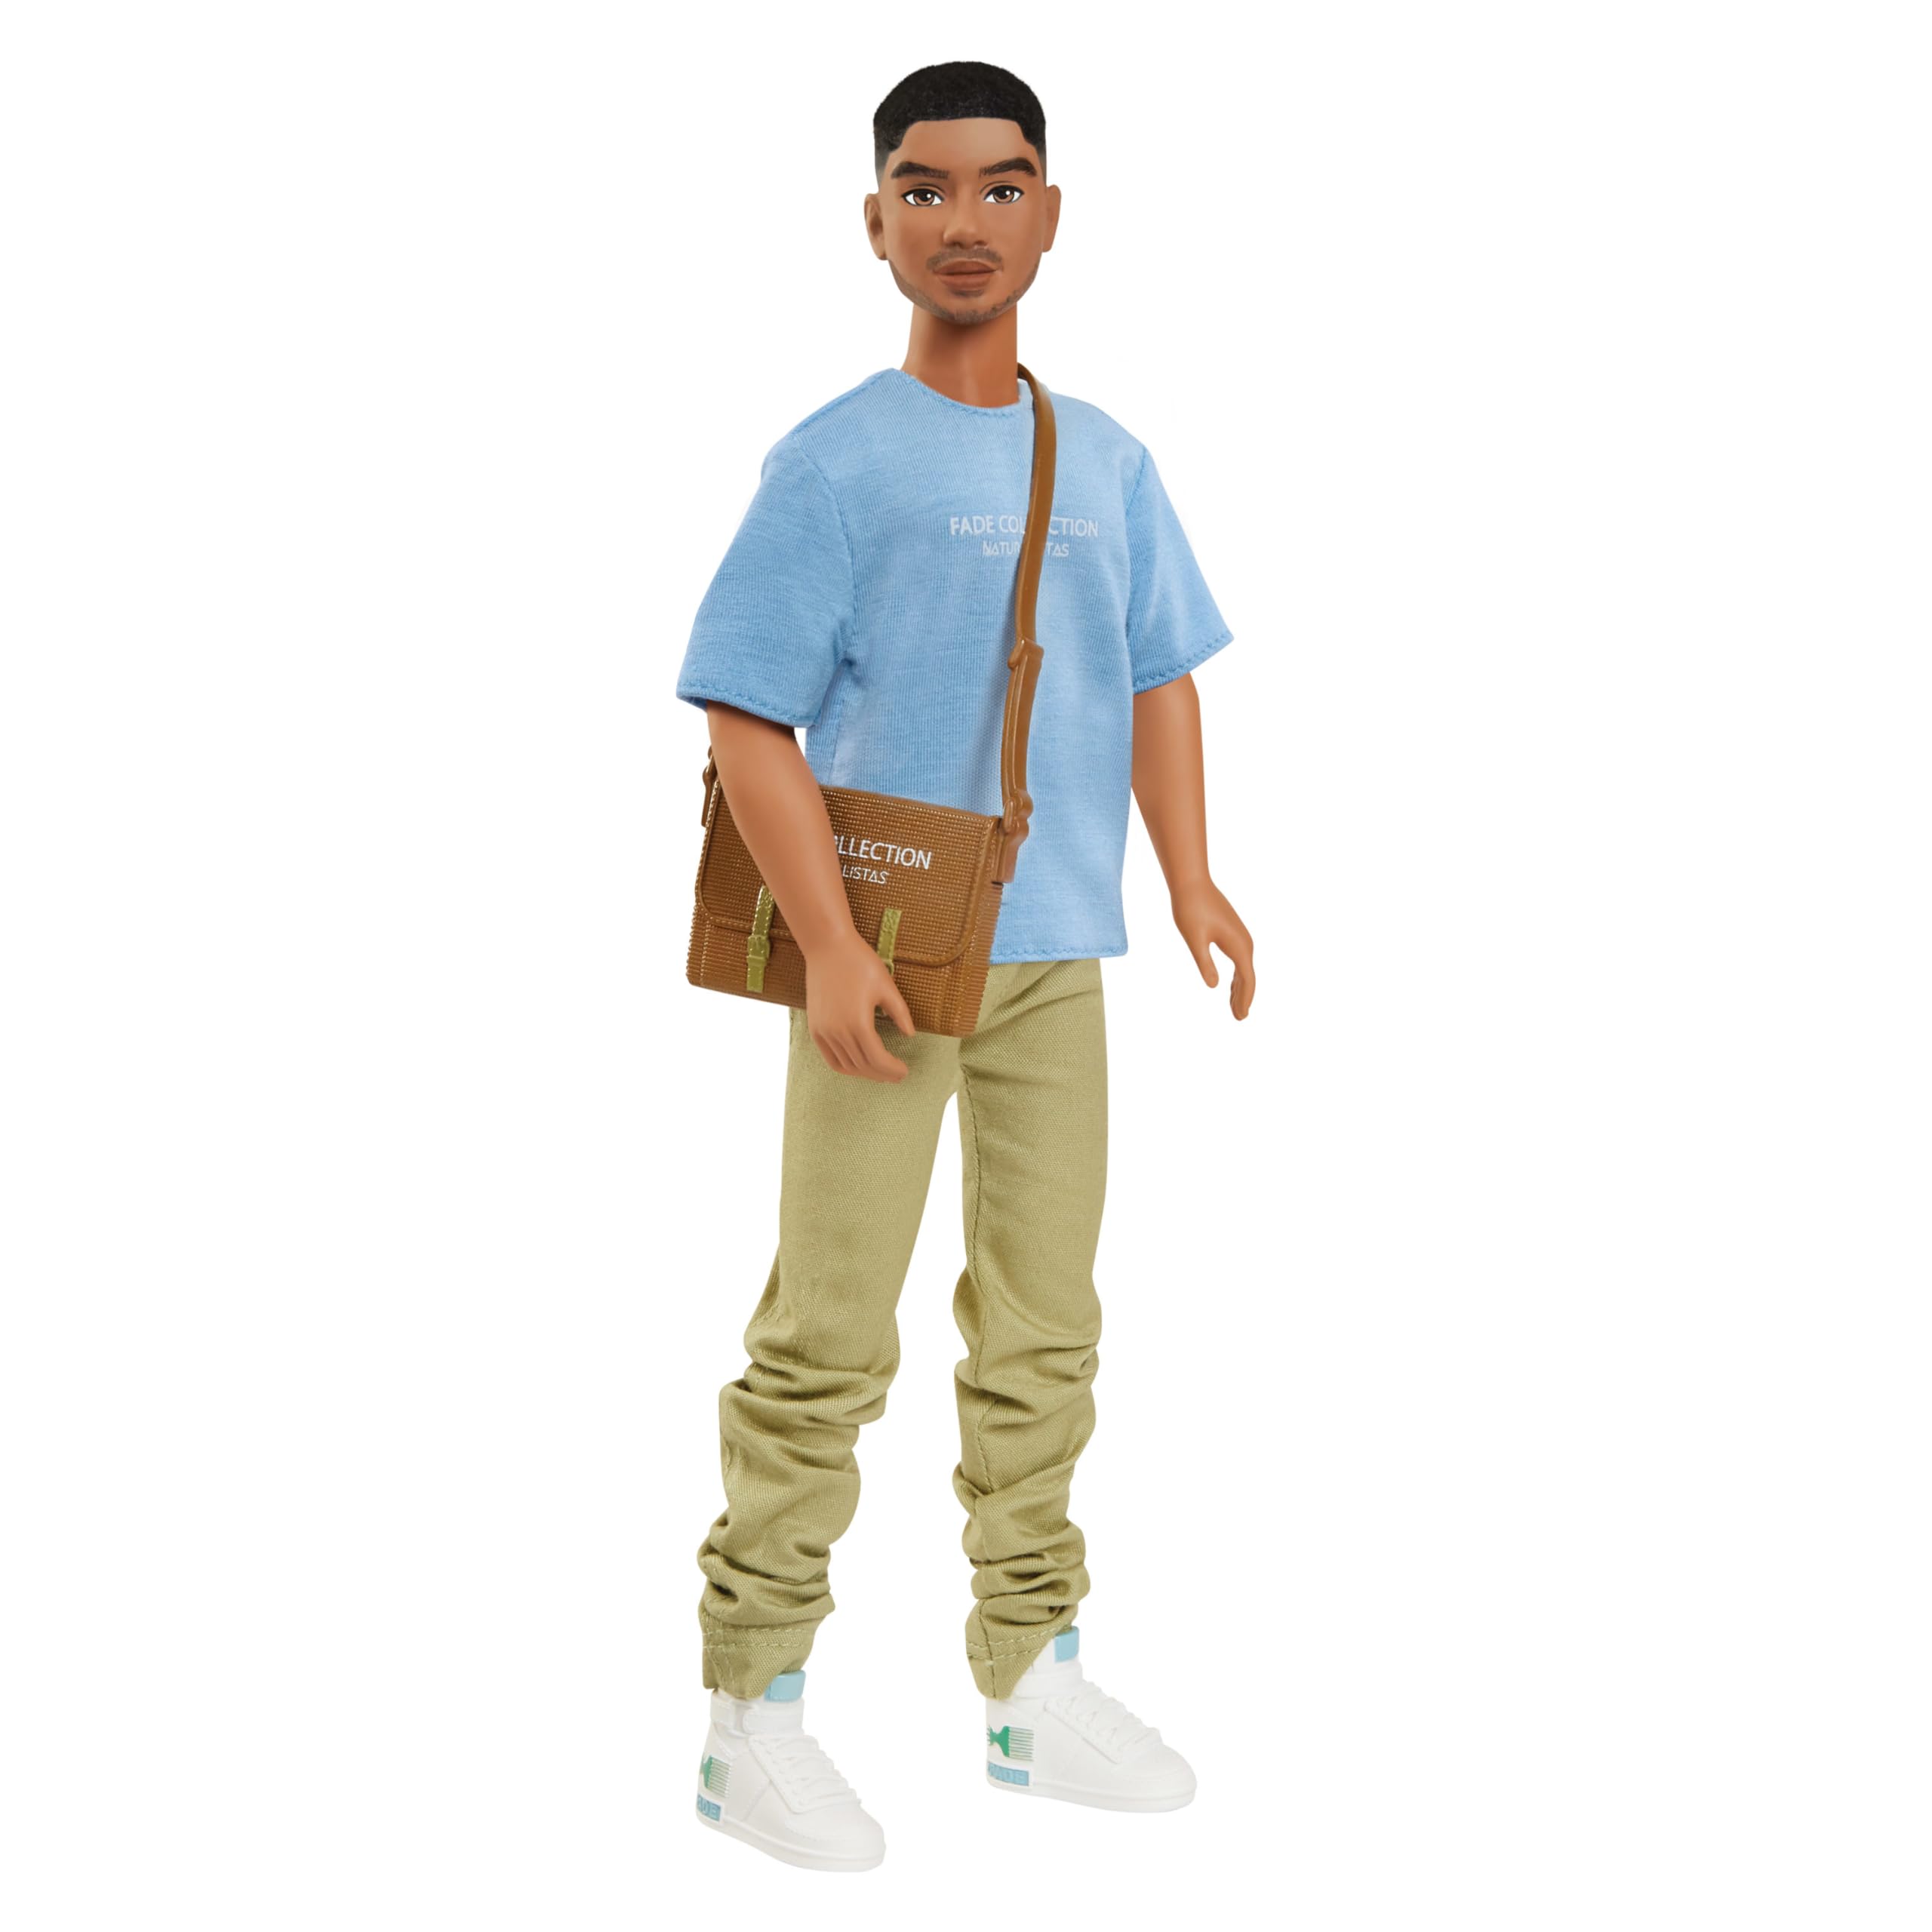 Naturalistas Fade Collection Greg 12-inch, Cultural Action Figure and Fashion Doll and Accessories, Medium Brown Skin Tone, Designed and Developed by Purpose Toys